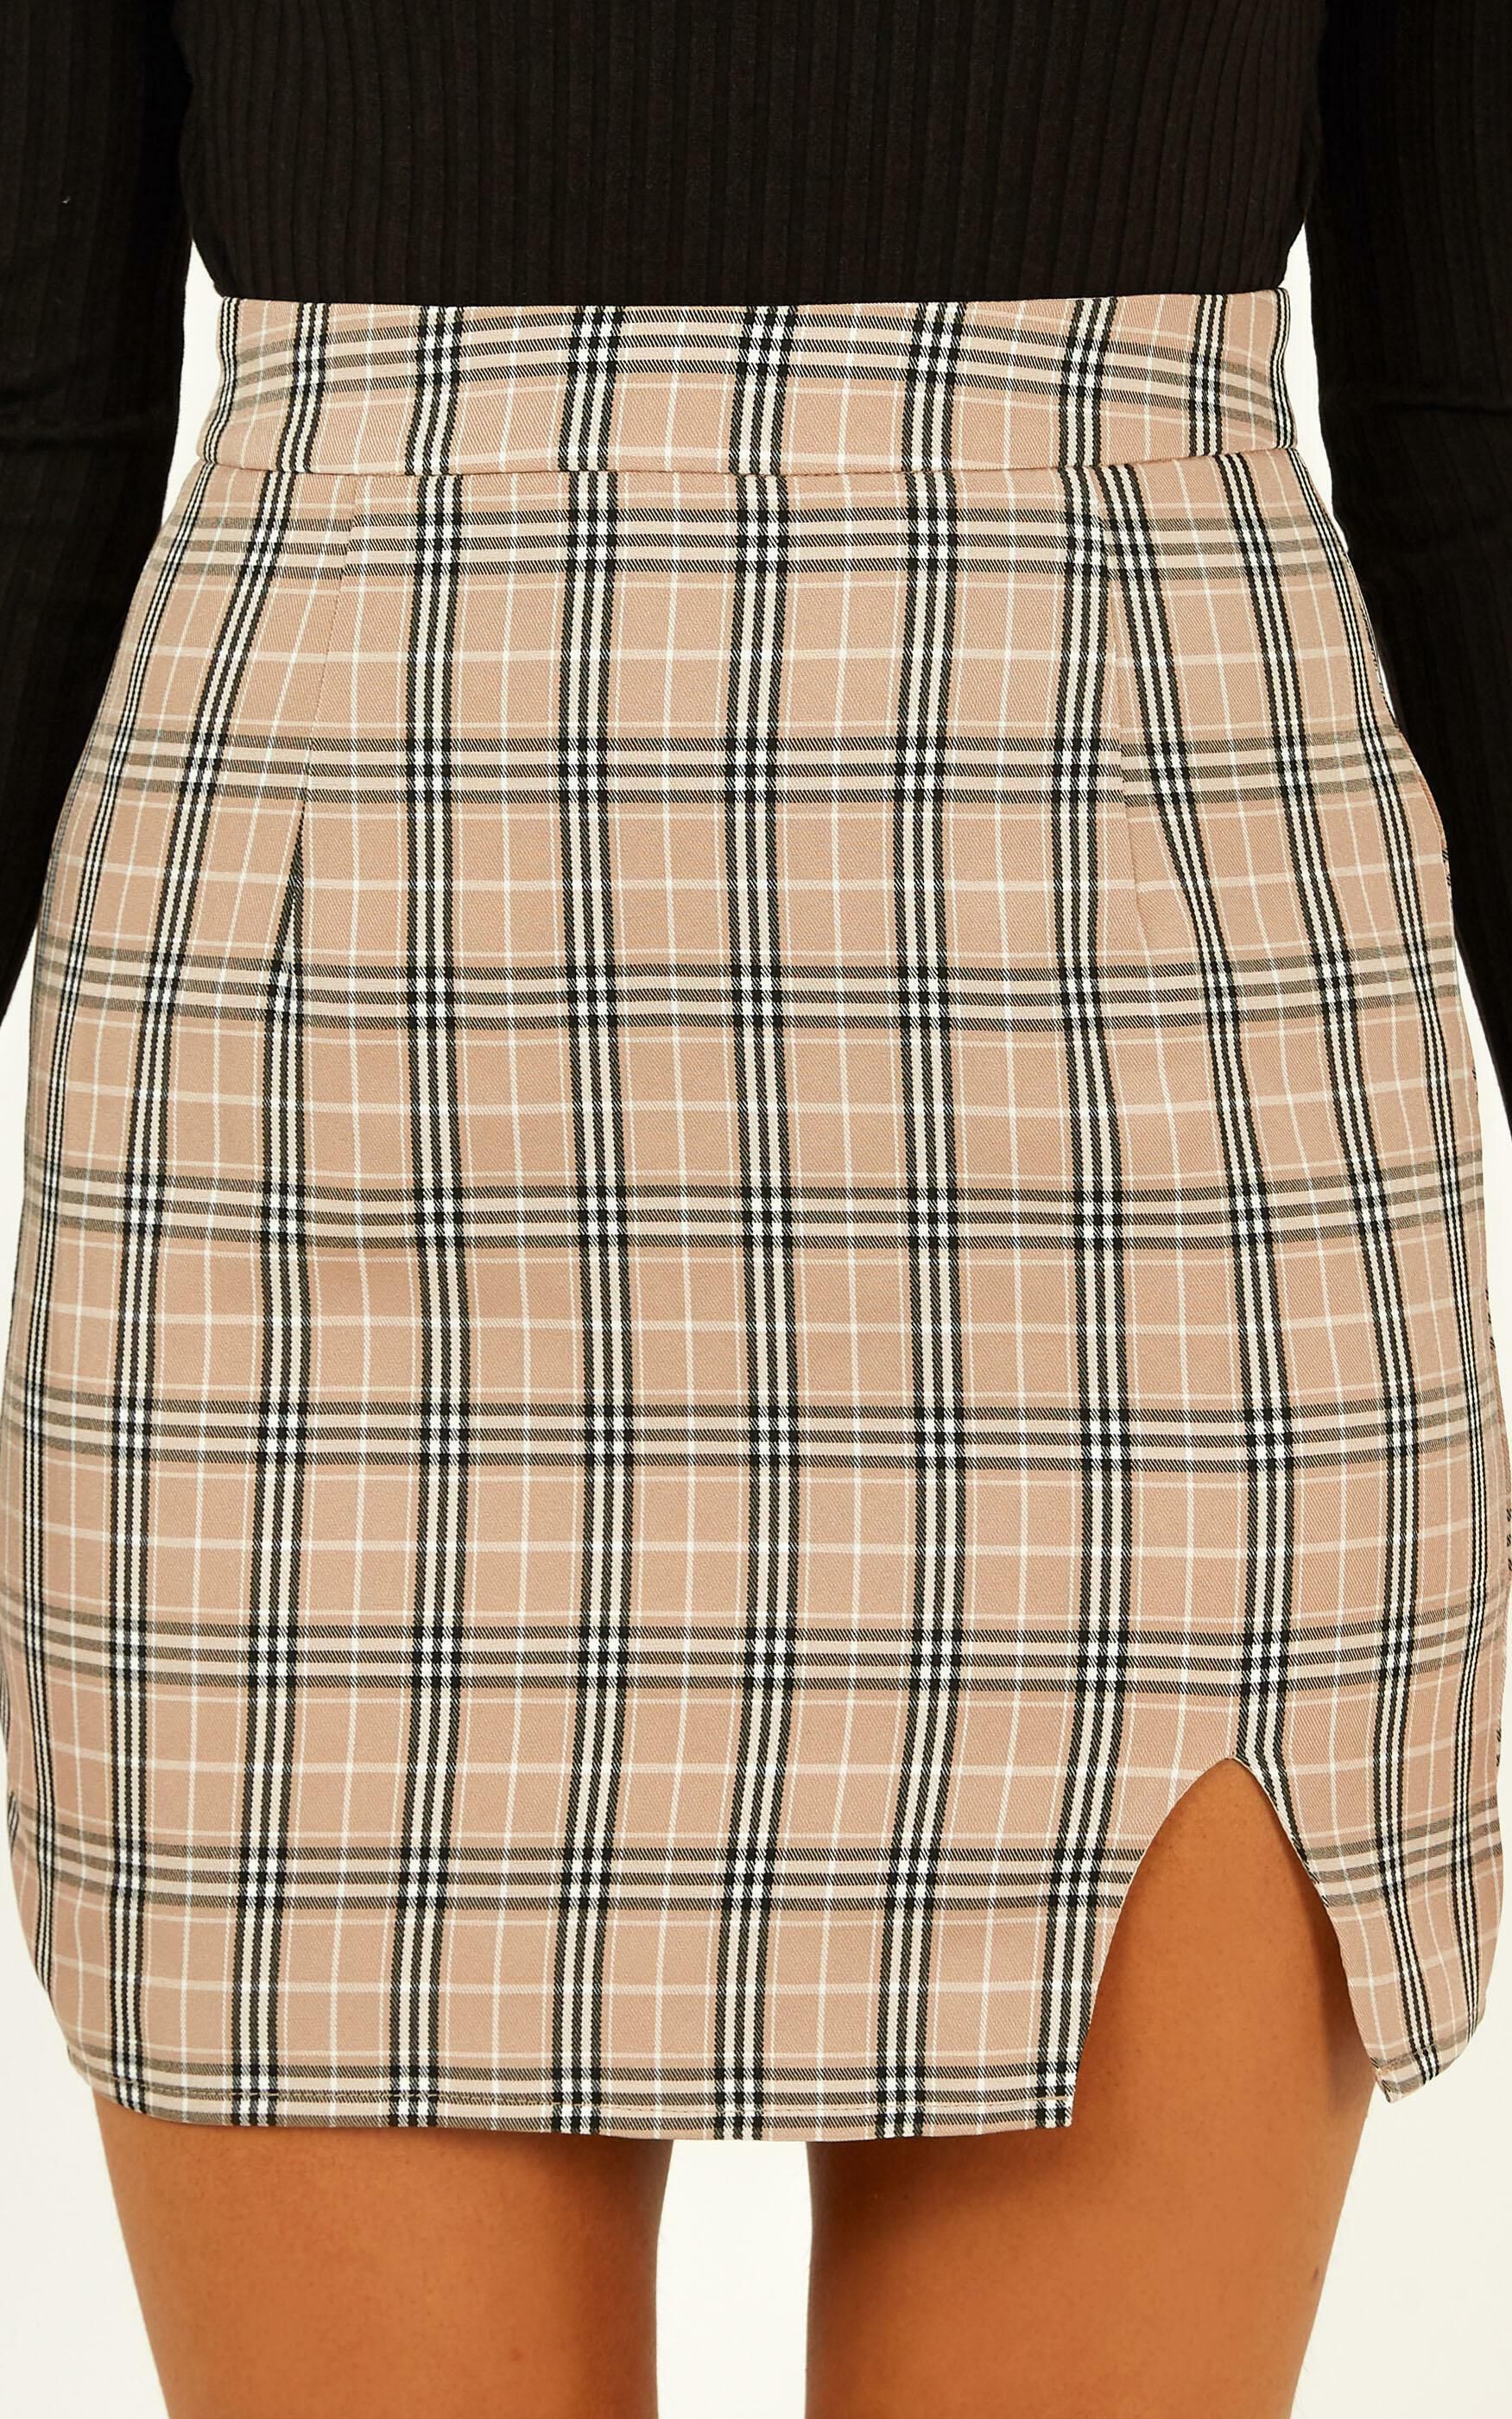 First Editions Skirt in beige check - 4 (XXS), Beige, super-hi-res image number null